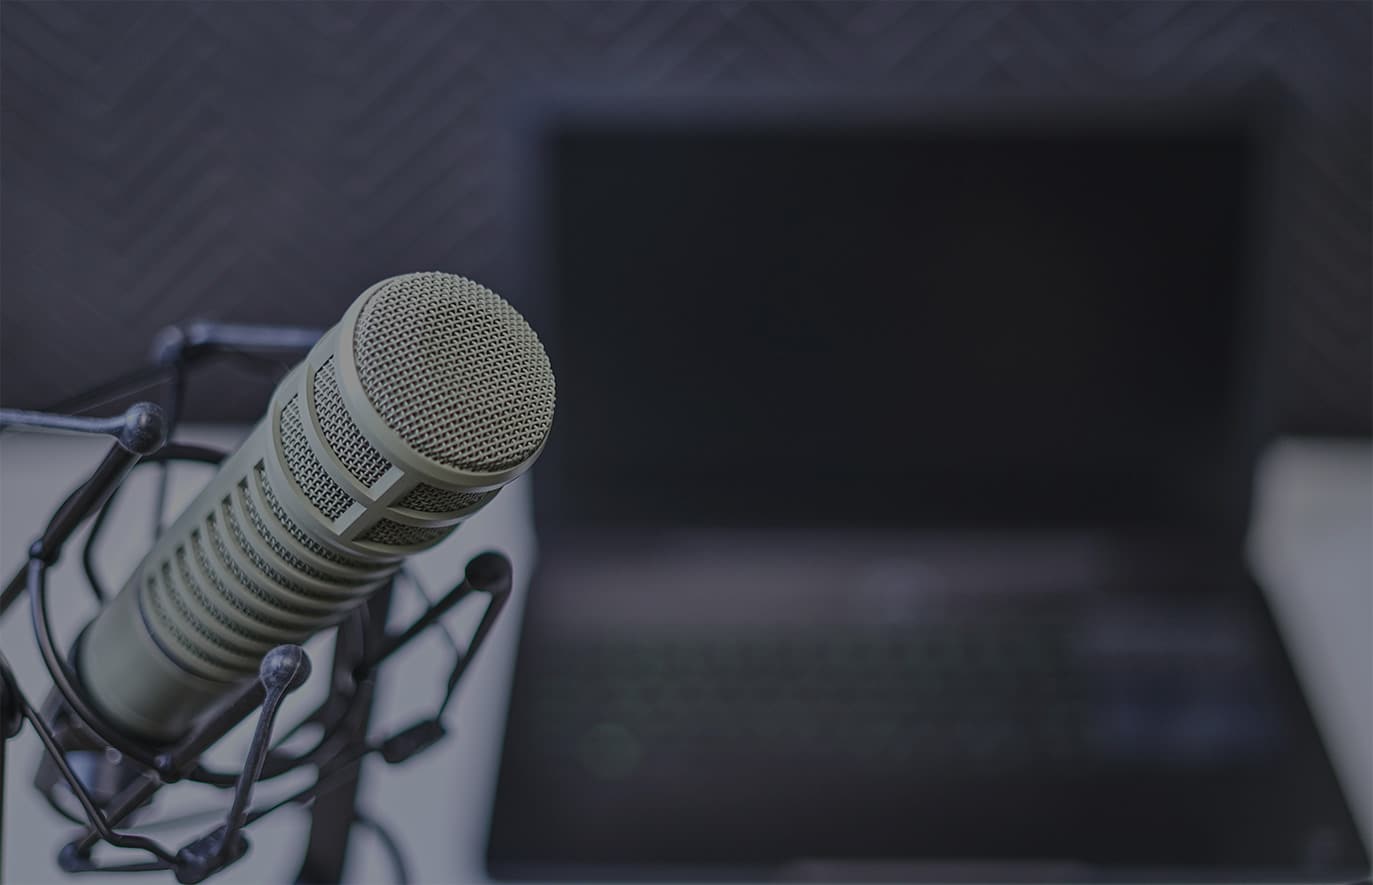 FCPA Compliance & Ethics Podcast featuring Jerry Coyne — The Use of Monitors by State Attorneys General: Ep. 5